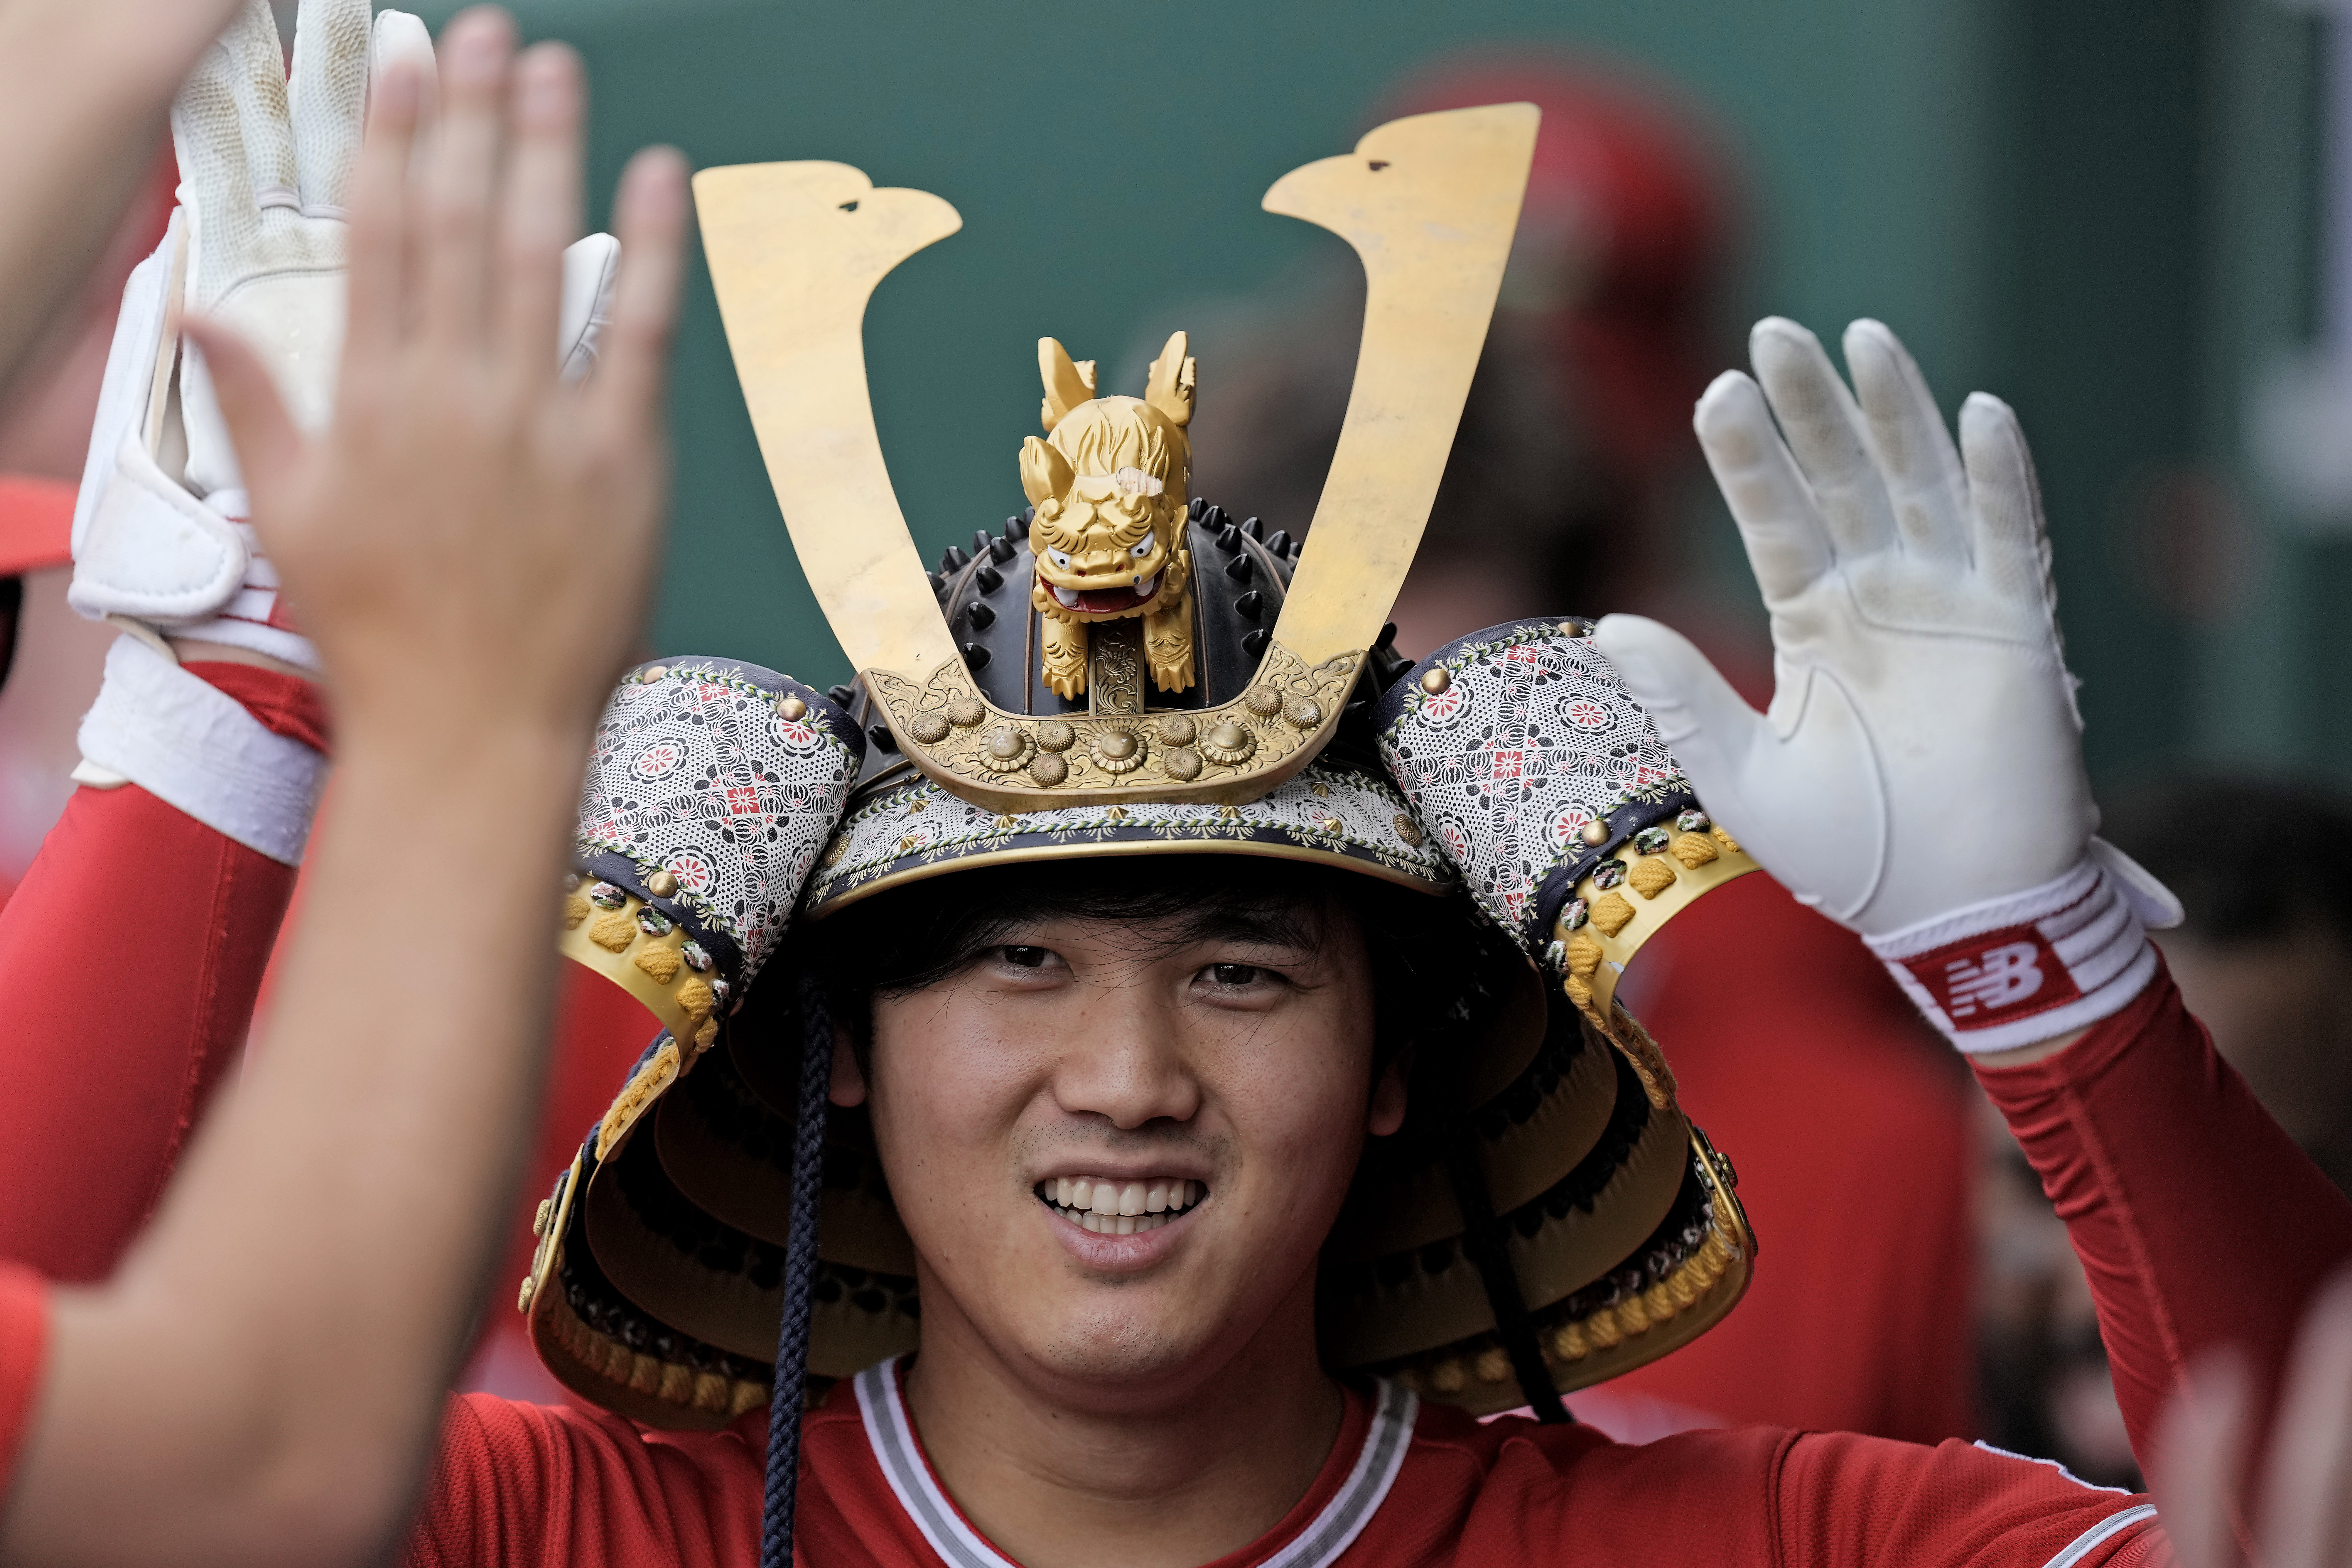 Shohei Ohtani fans get chance to see copy of Angels samurai helmet